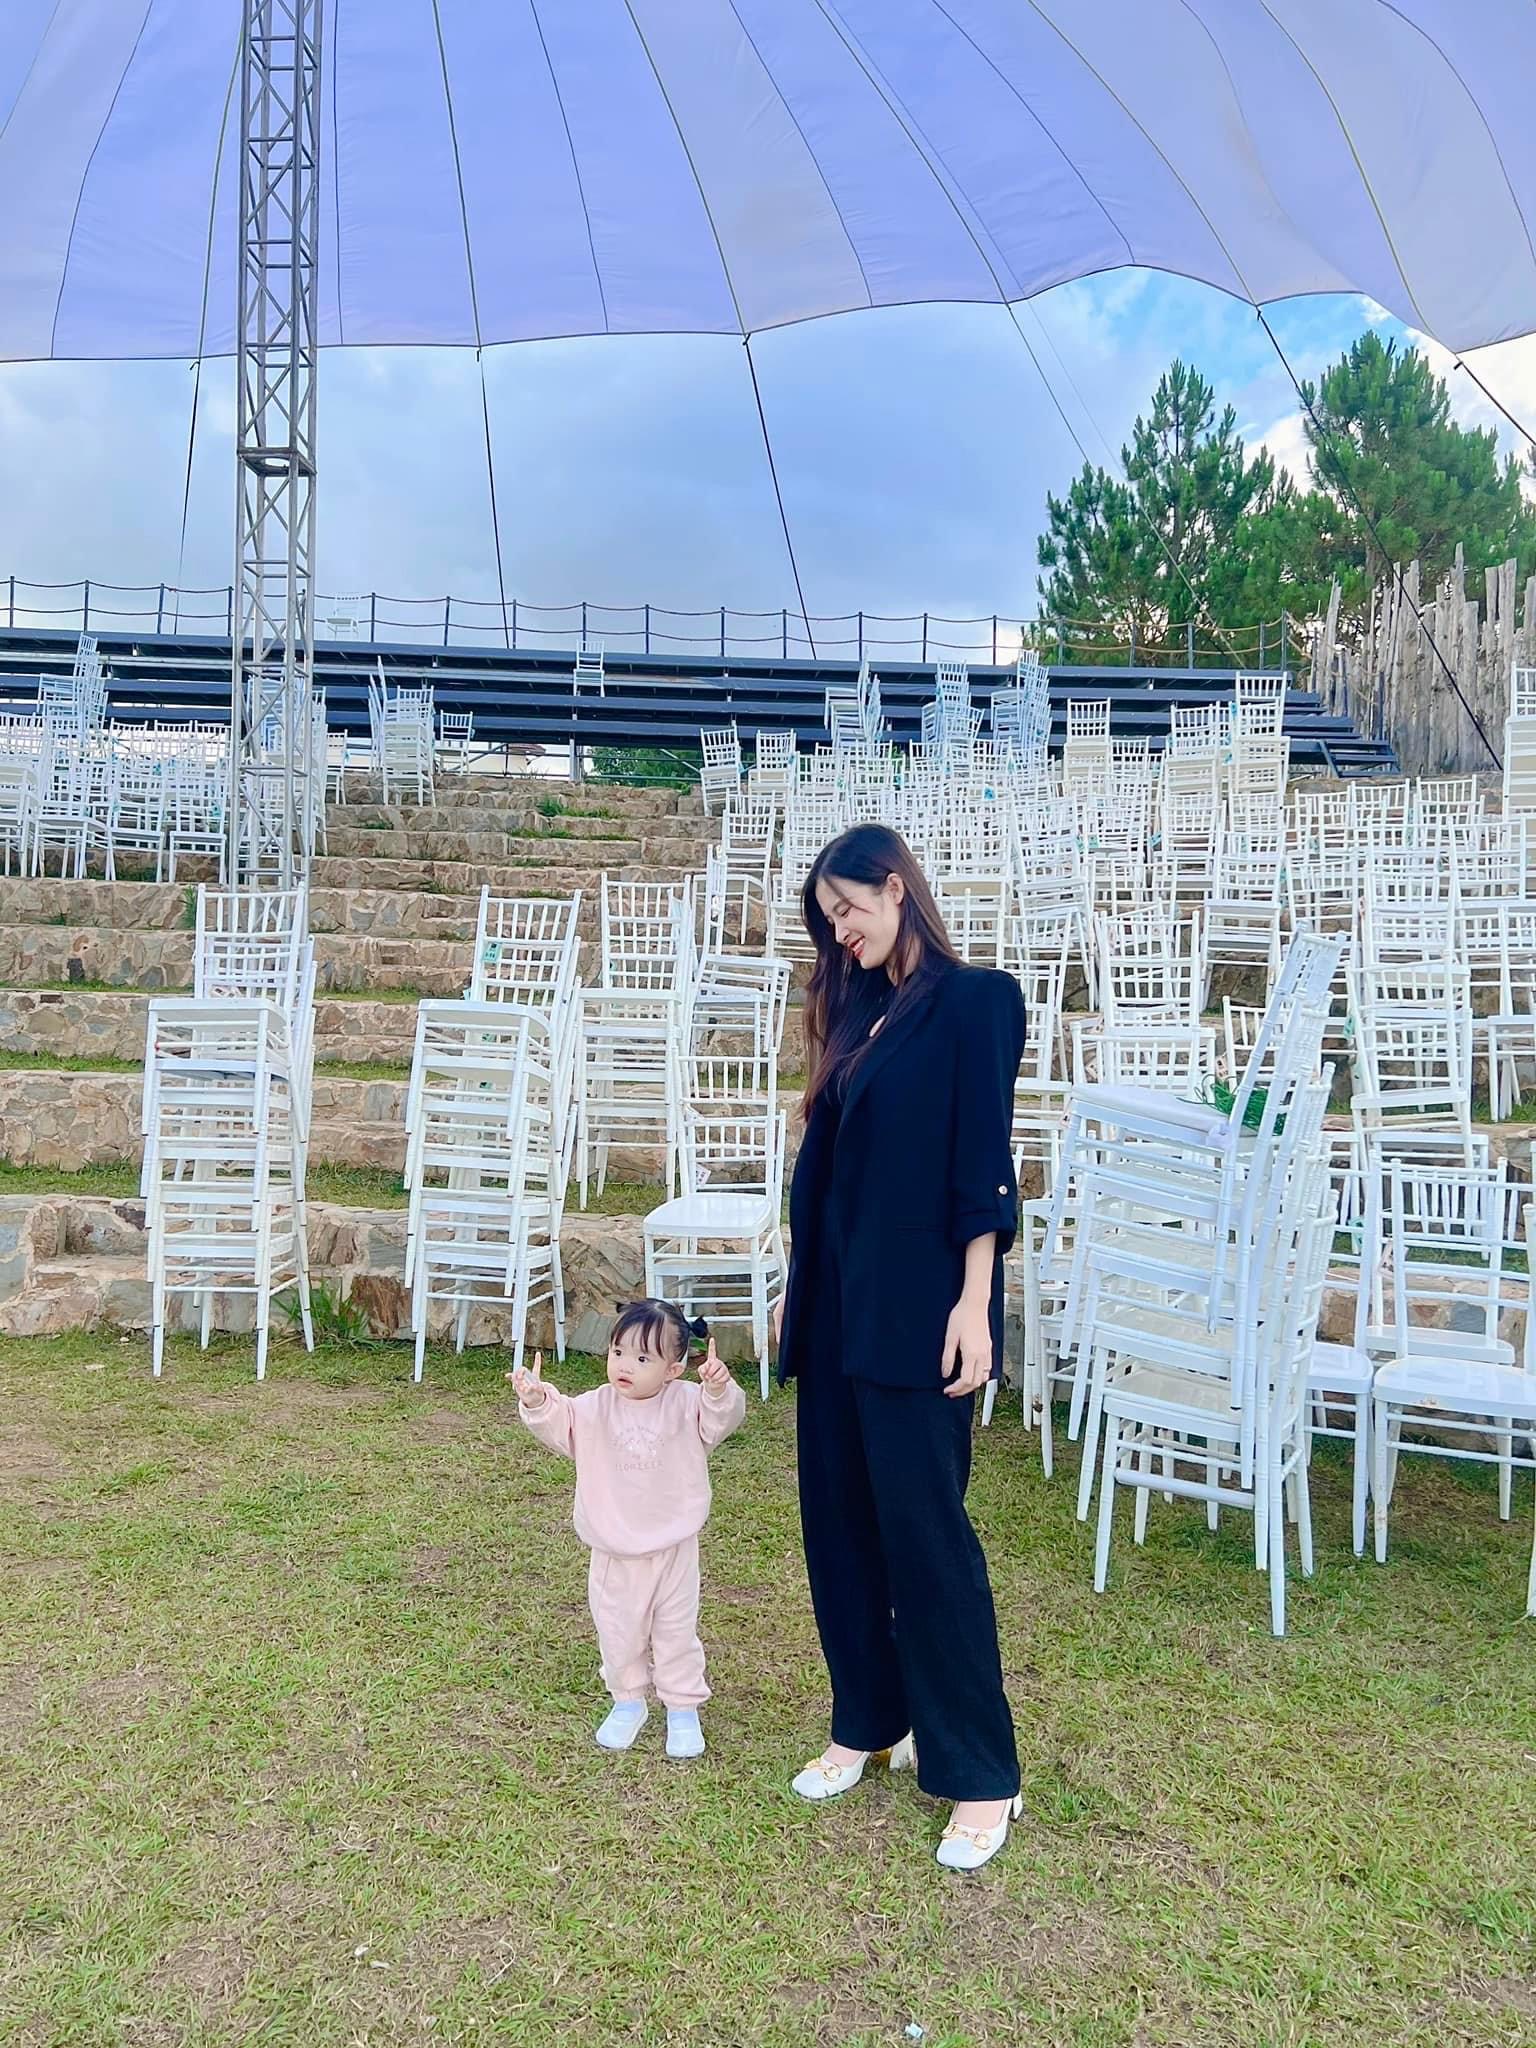 The 1-year-old daughter of the Dong Nhi family has followed her mother to perform, will there be any collaboration on stage tomorrow?  - Photo 2.